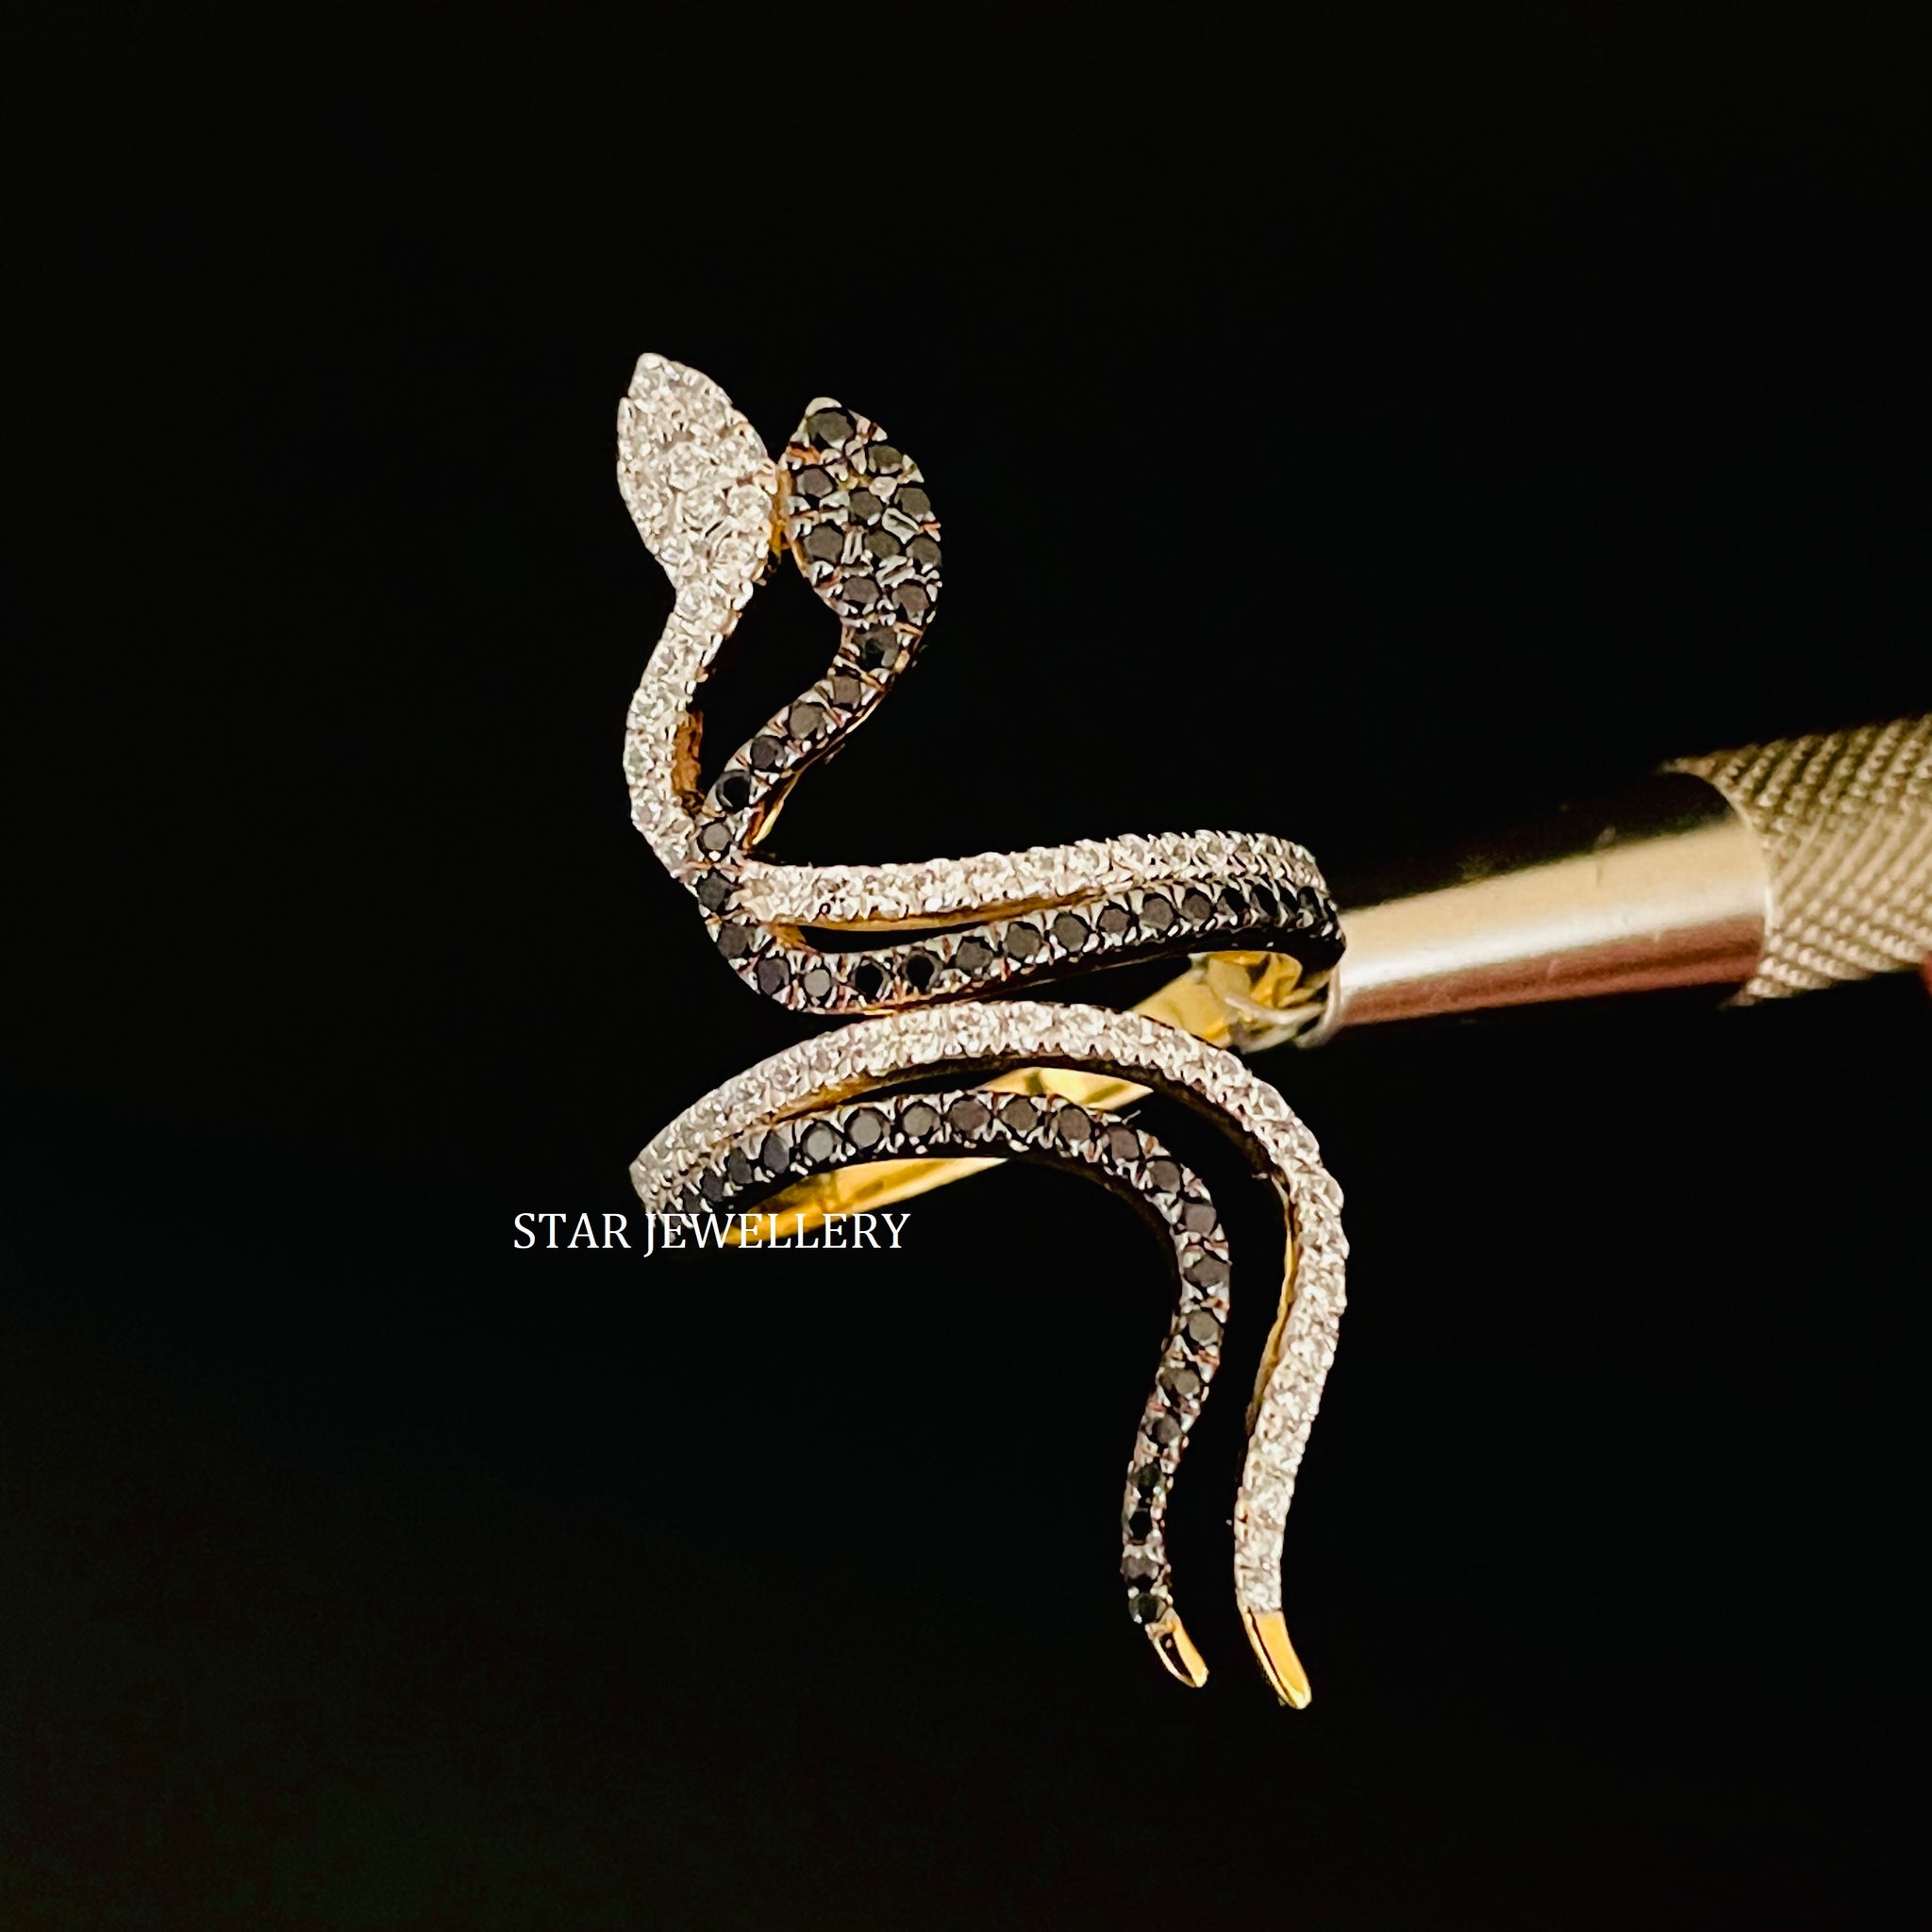 14K Solid Gold Dual Snake Ring